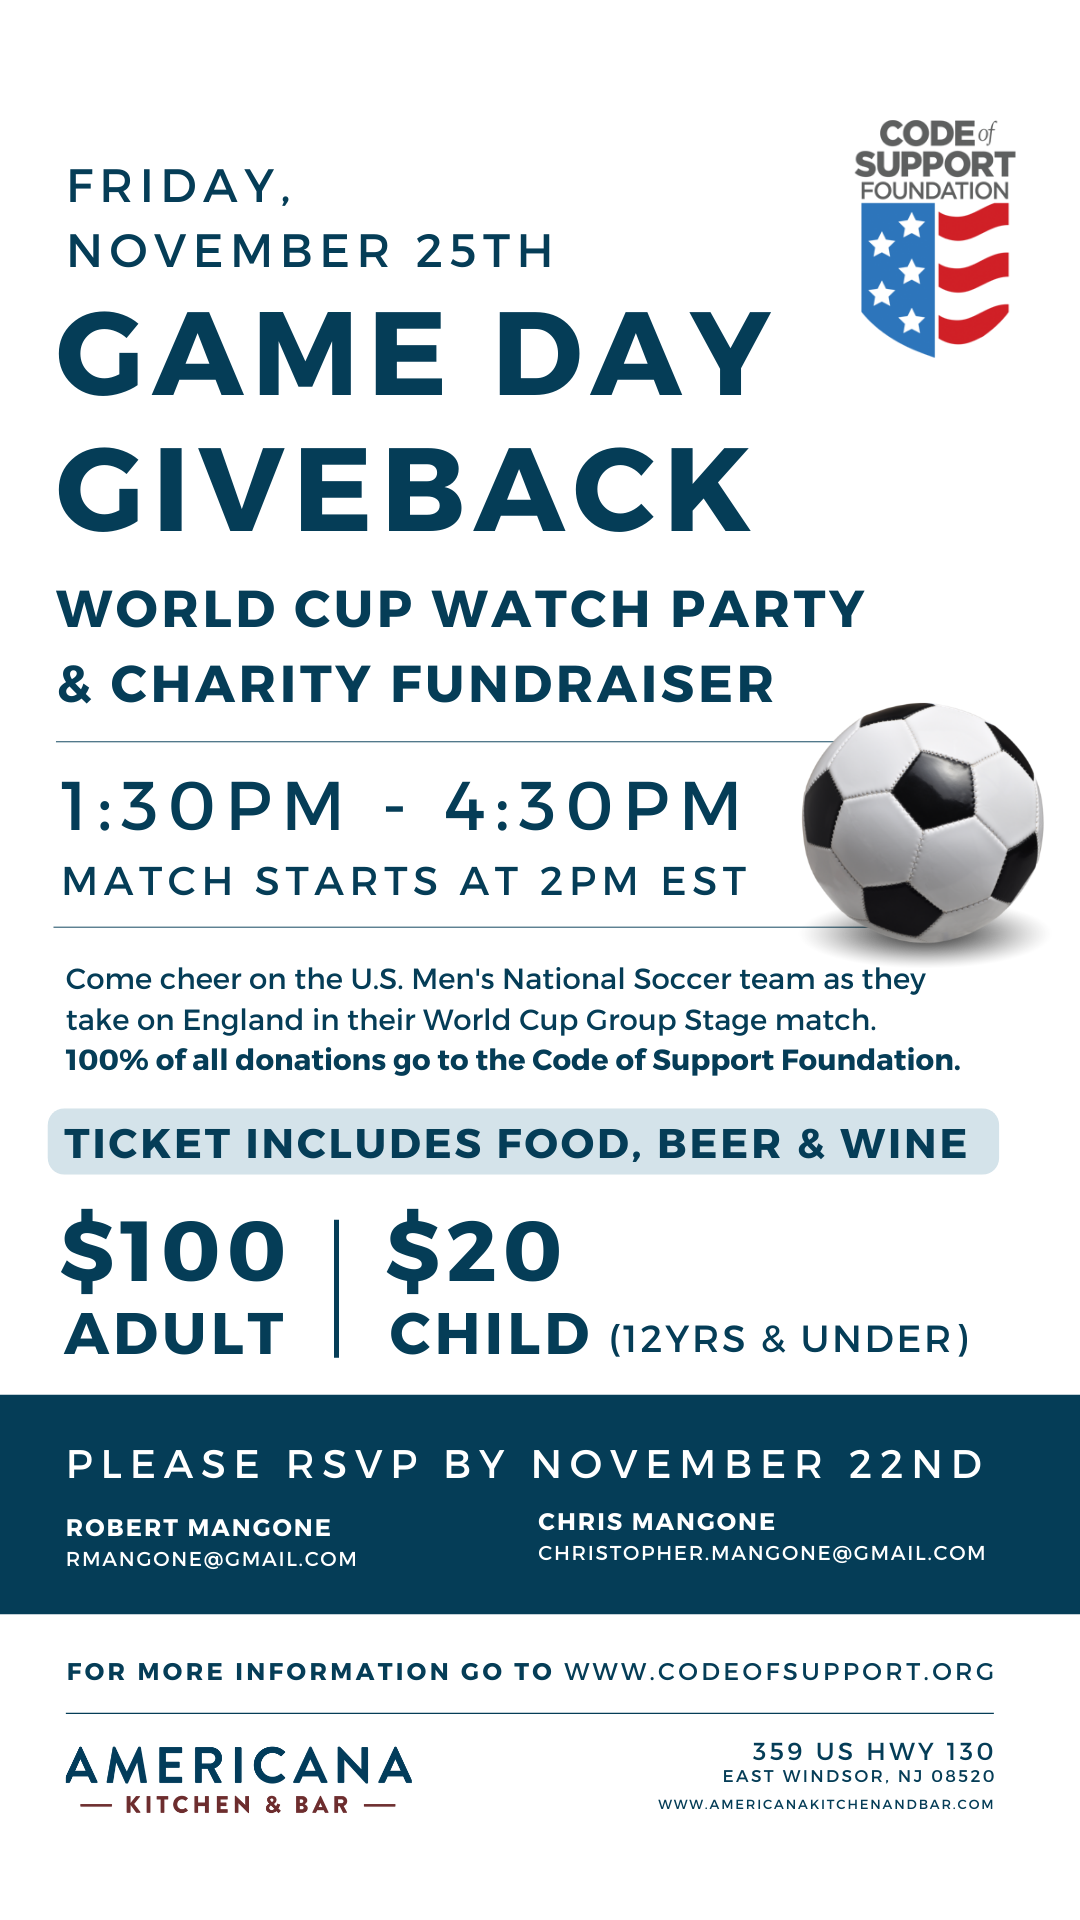 World Cup Watch Party and Charity Fundraiser